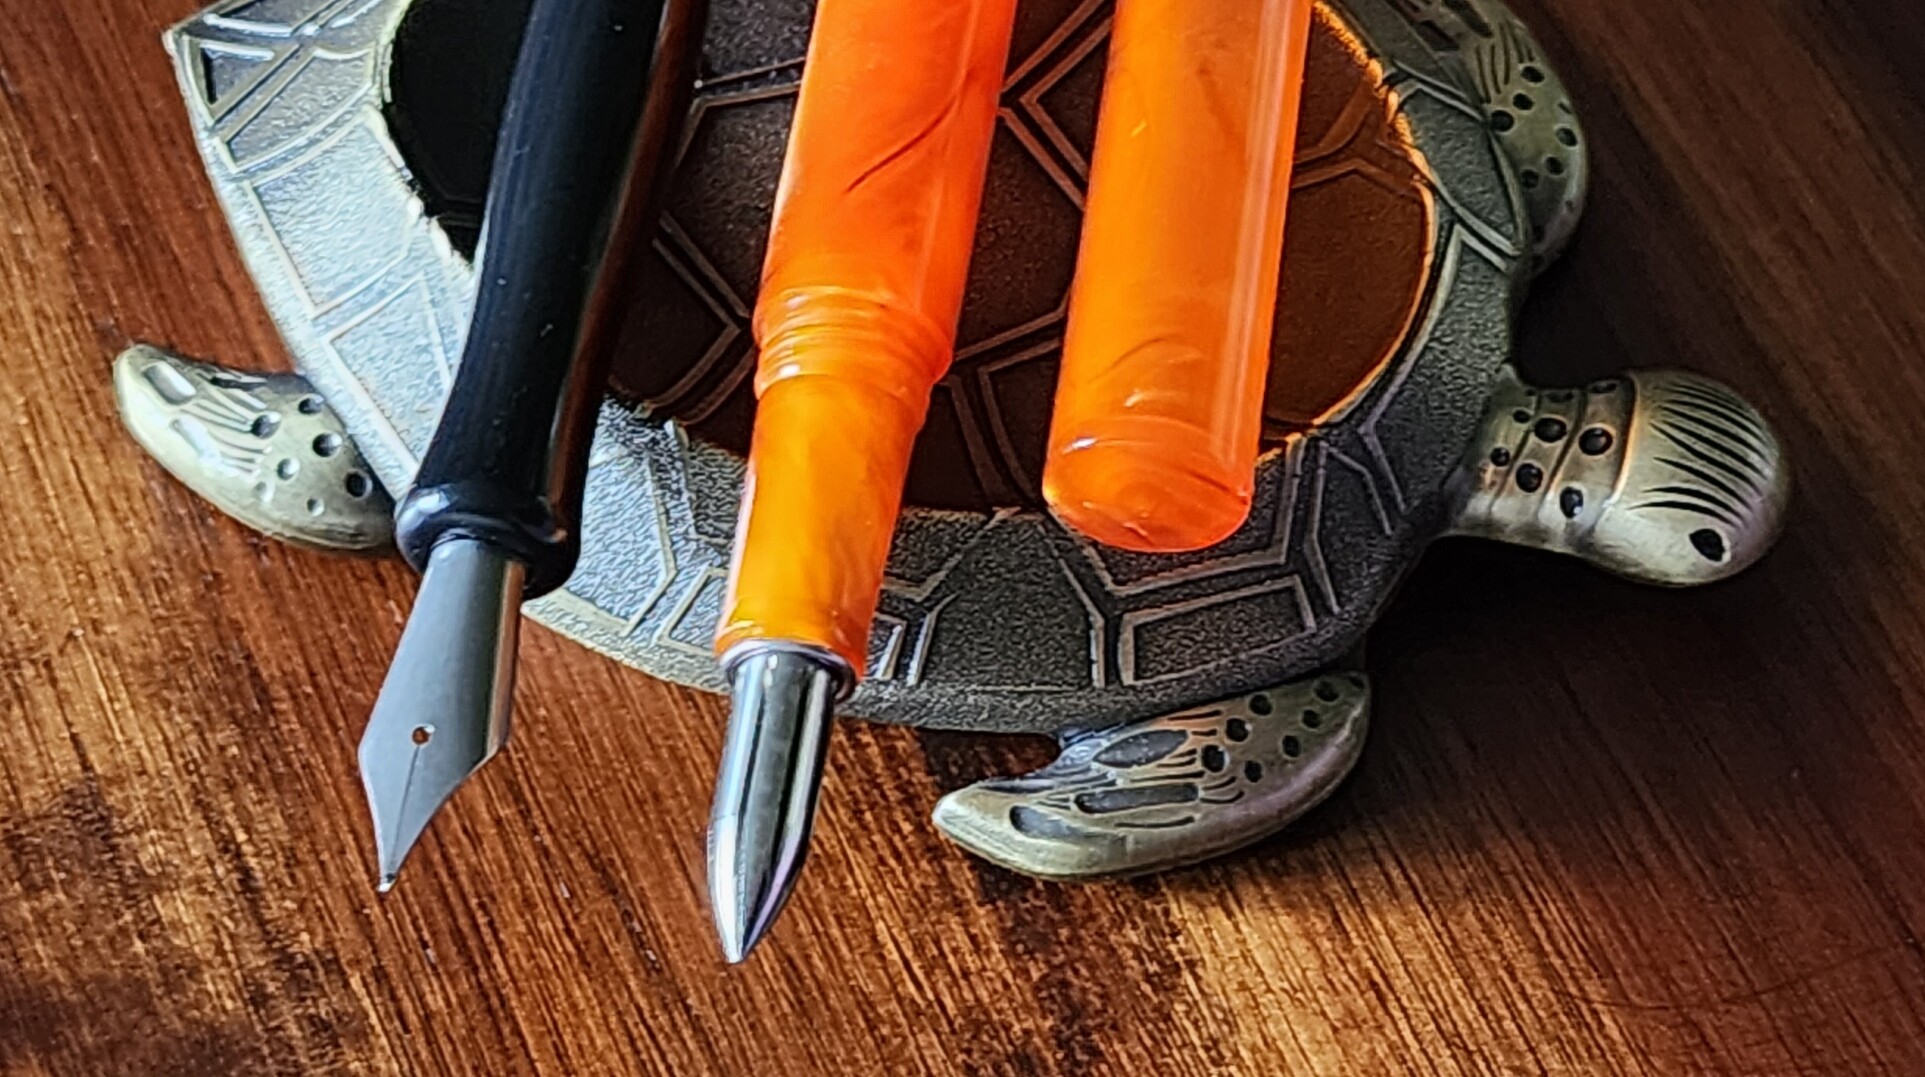 A Kakimori pen nib, shaped like a firm fountain pen nib without a feed, in a black plastic nib holder. A Kakimori stainless steel nib that is a conical shape with groves to hold ink in a ferrule that happens to fit ok into another plastic orange pen body with a cap. Both pens are resting on a metal turtle pen rest.